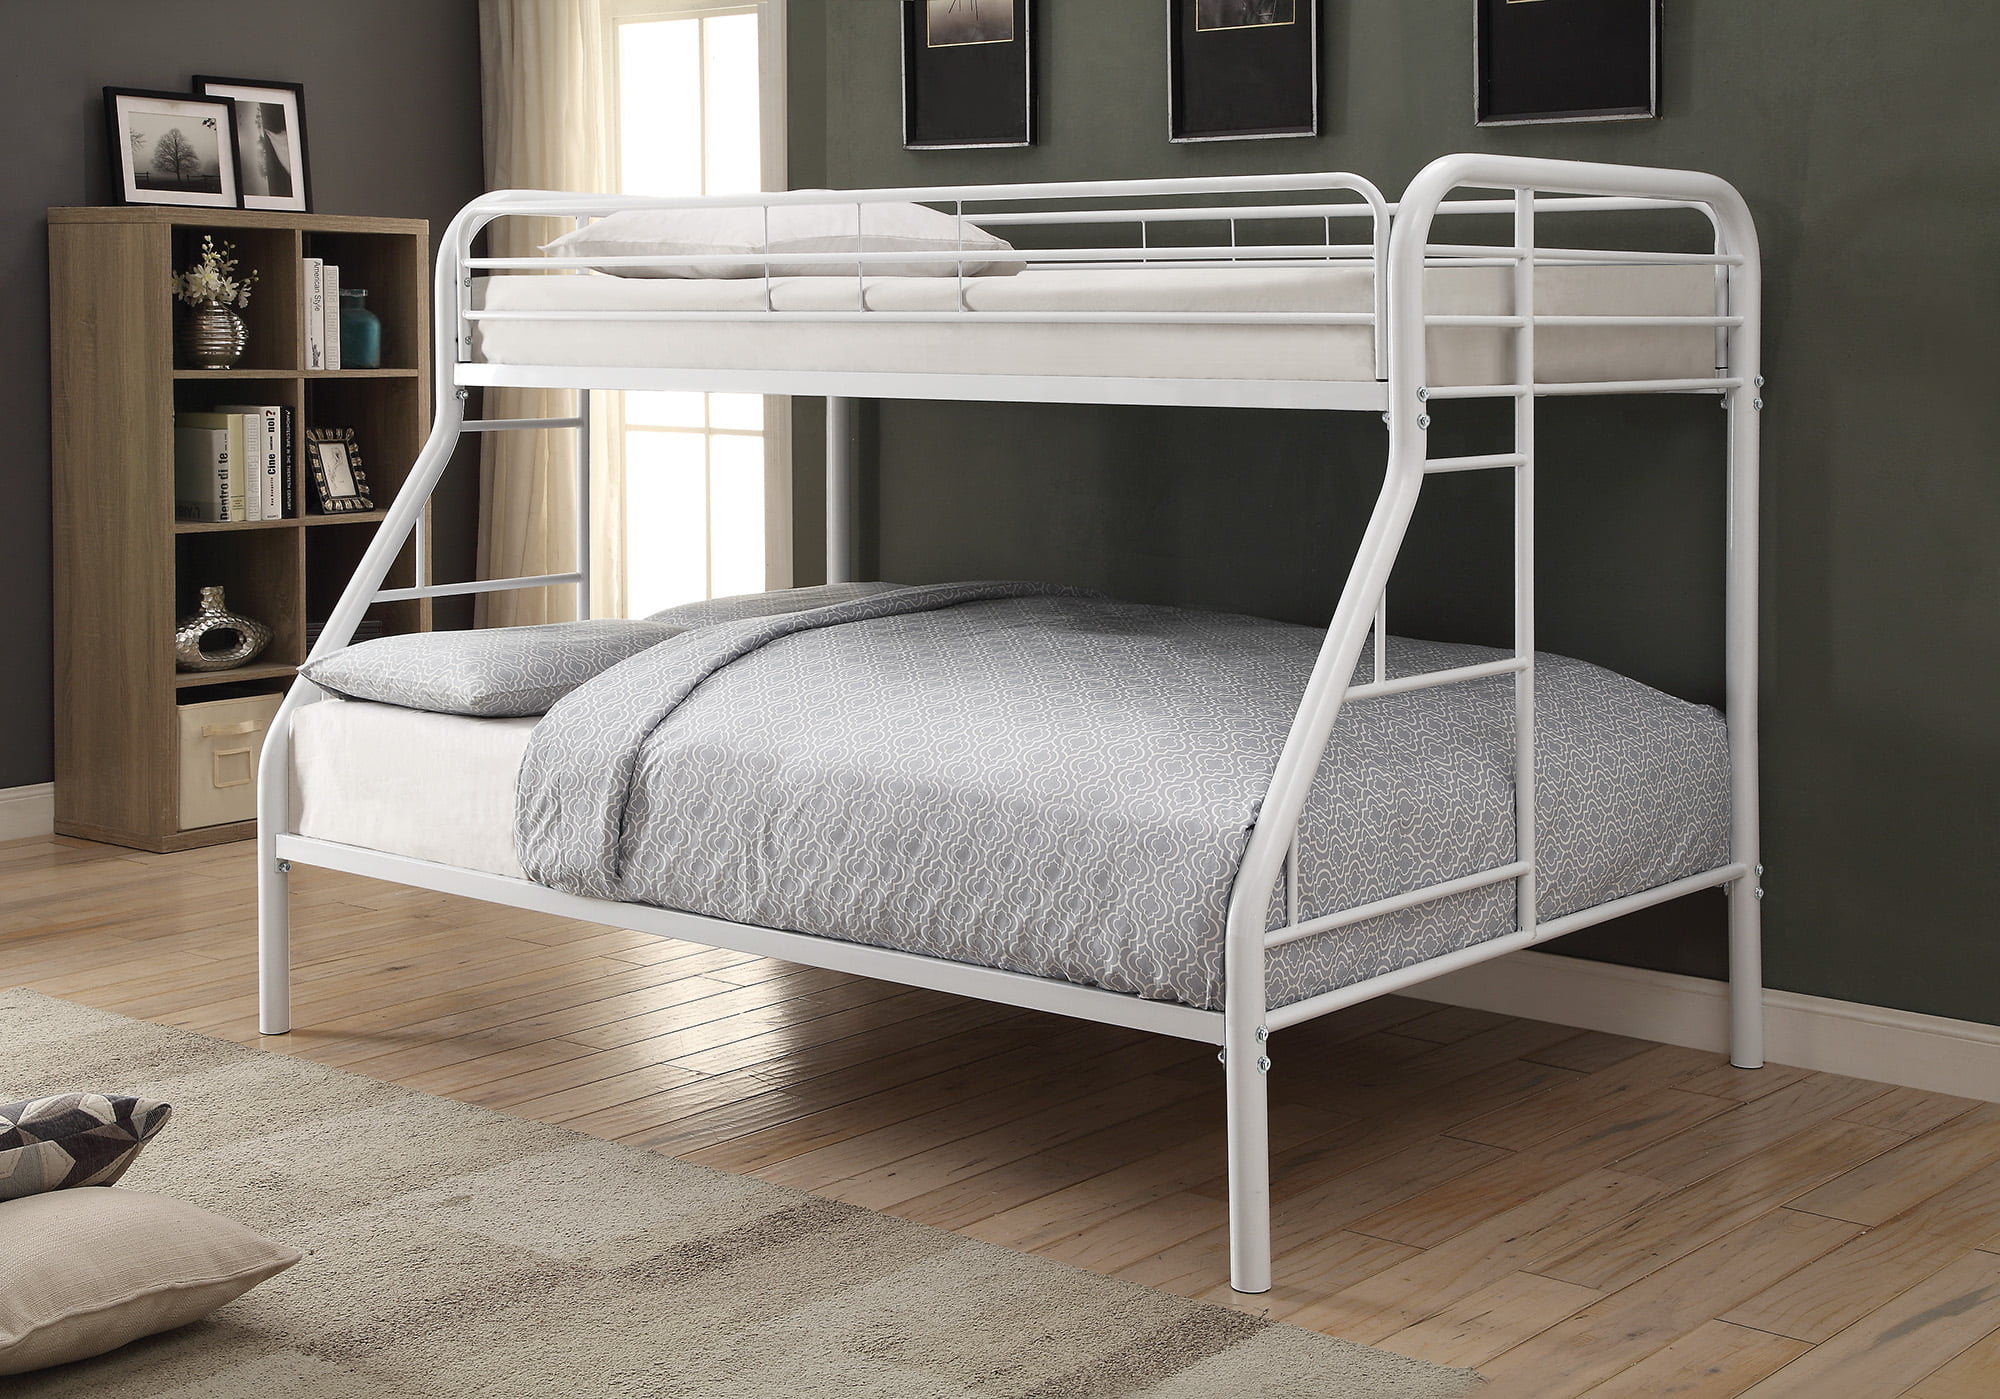 twin full mattress combo for bunk beds